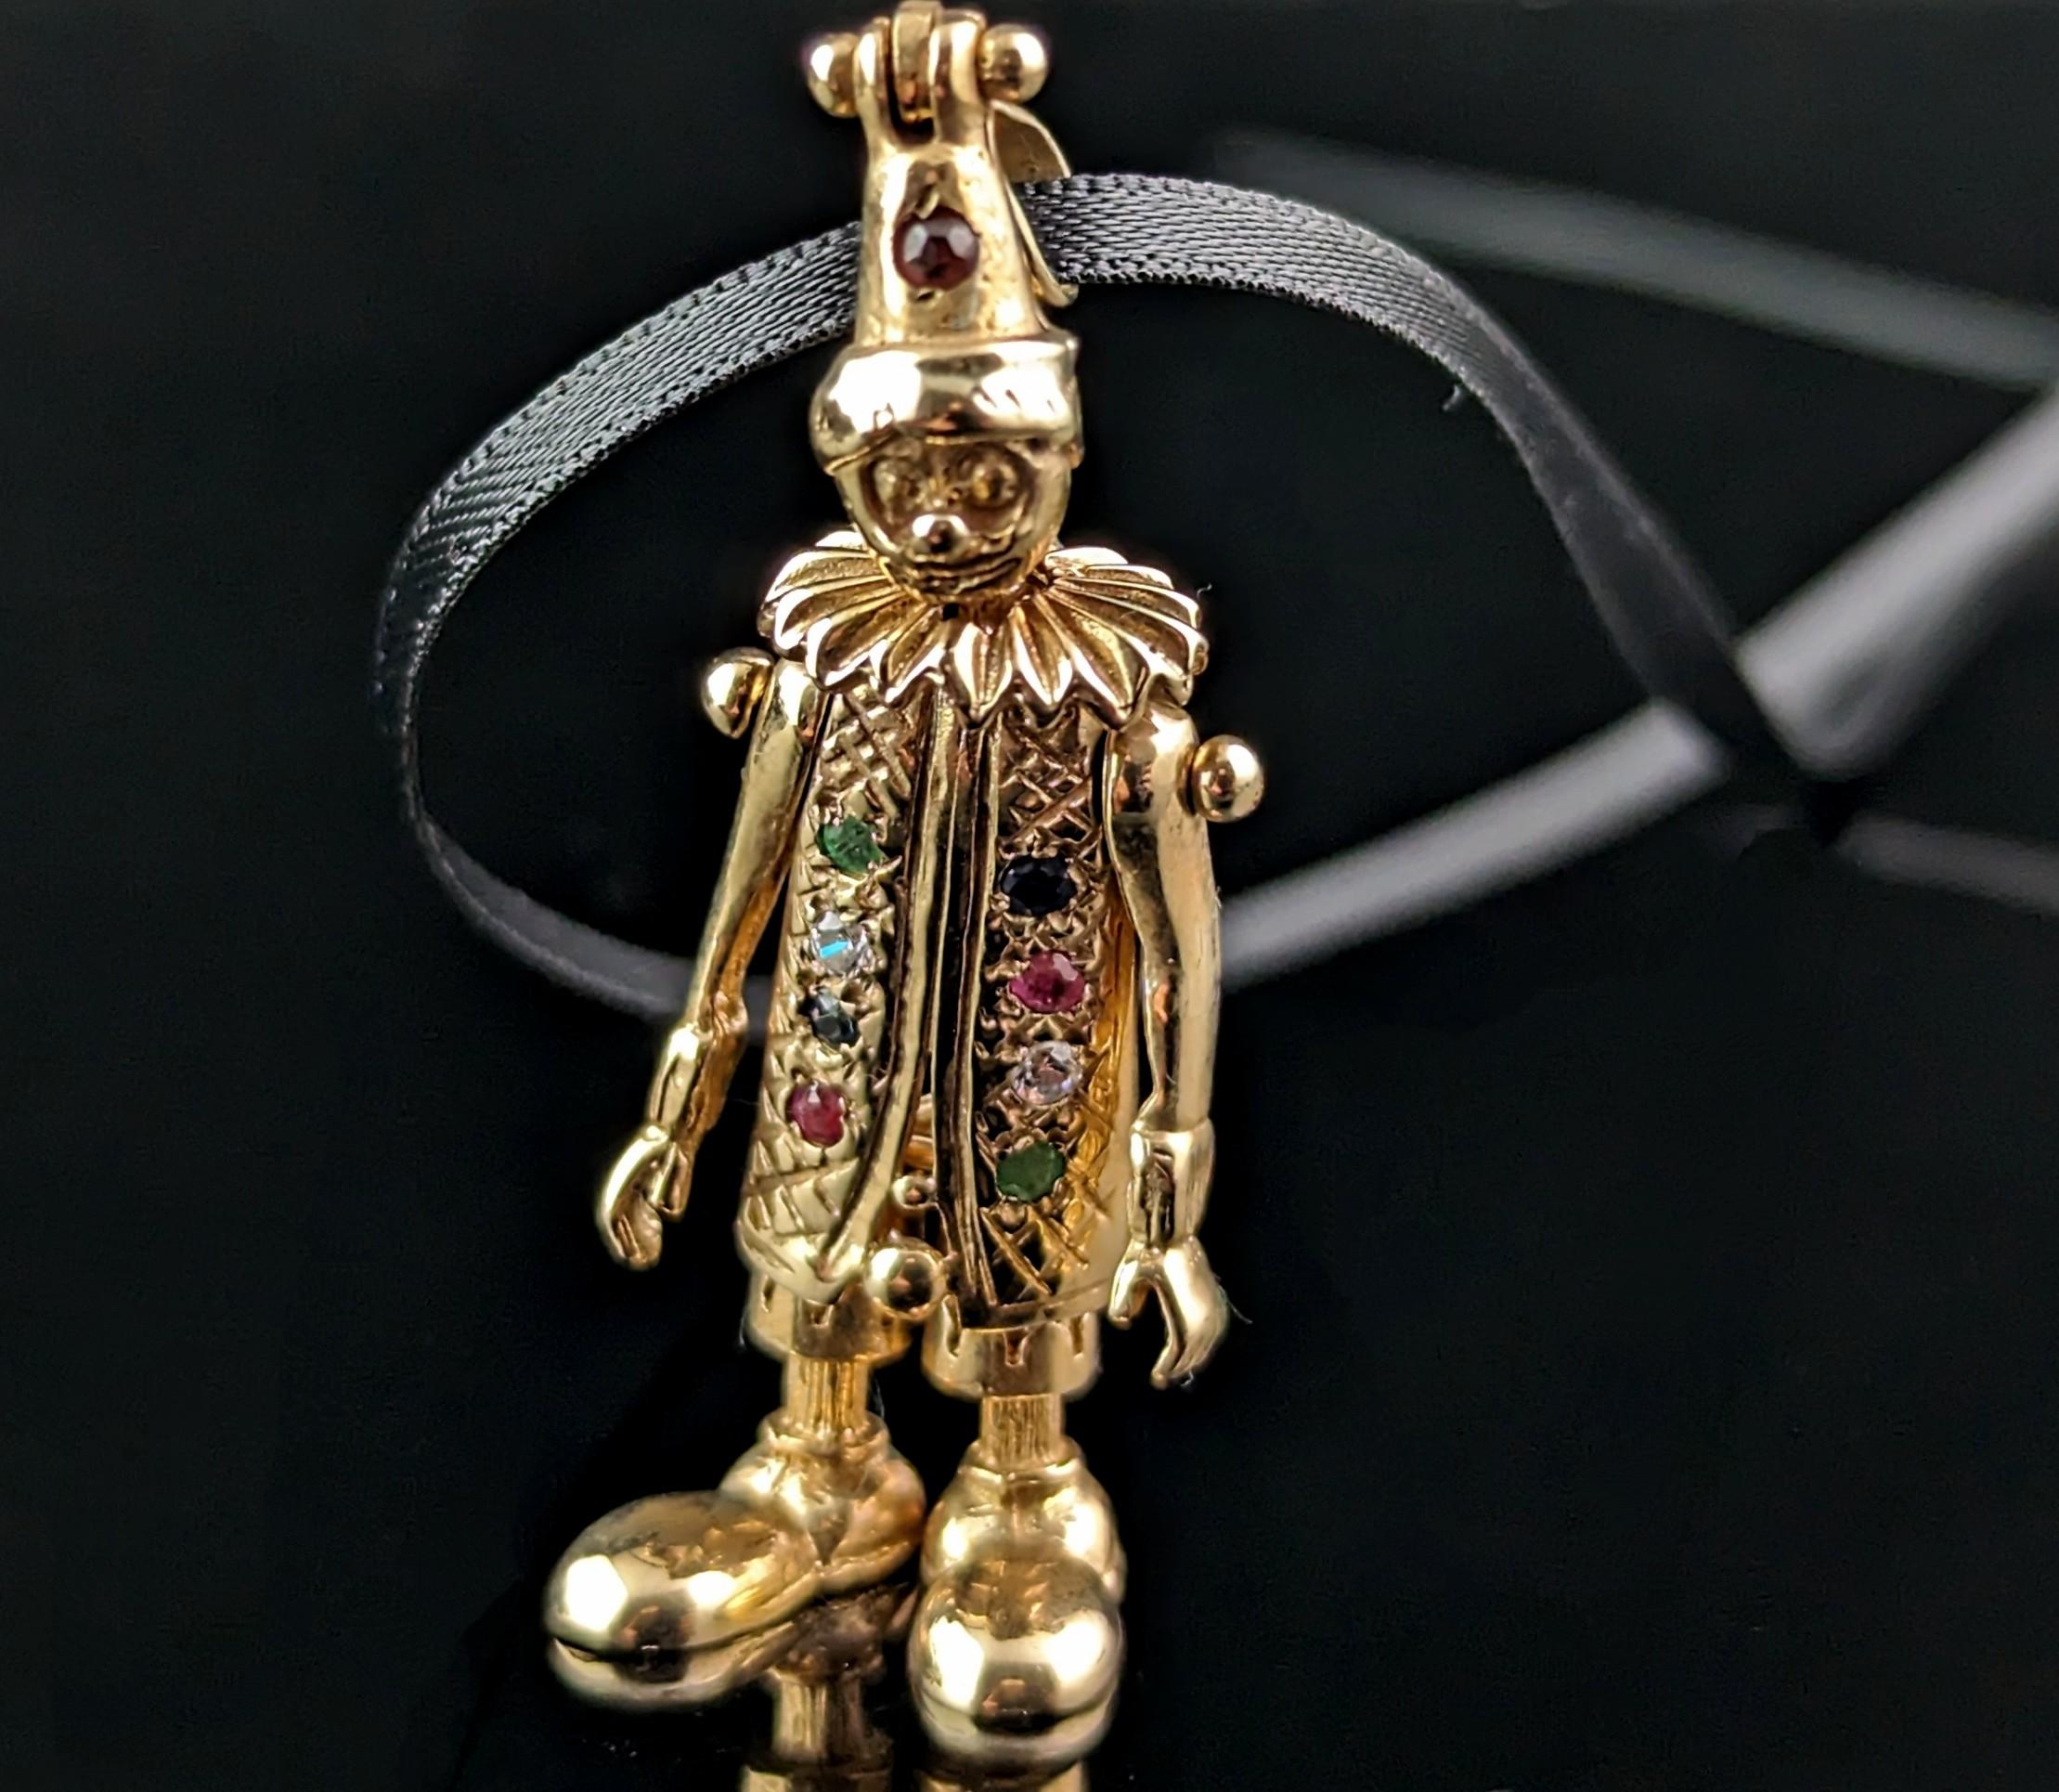 A fantastic vintage 9ct yellow gold articulated clown pendant.

A classic favourite from the 90s this clown pendant is fully articulated and has movable limbs.

It is set with clear paste, Sapphire, Garnet, Ruby and Emerald stones to the front, down